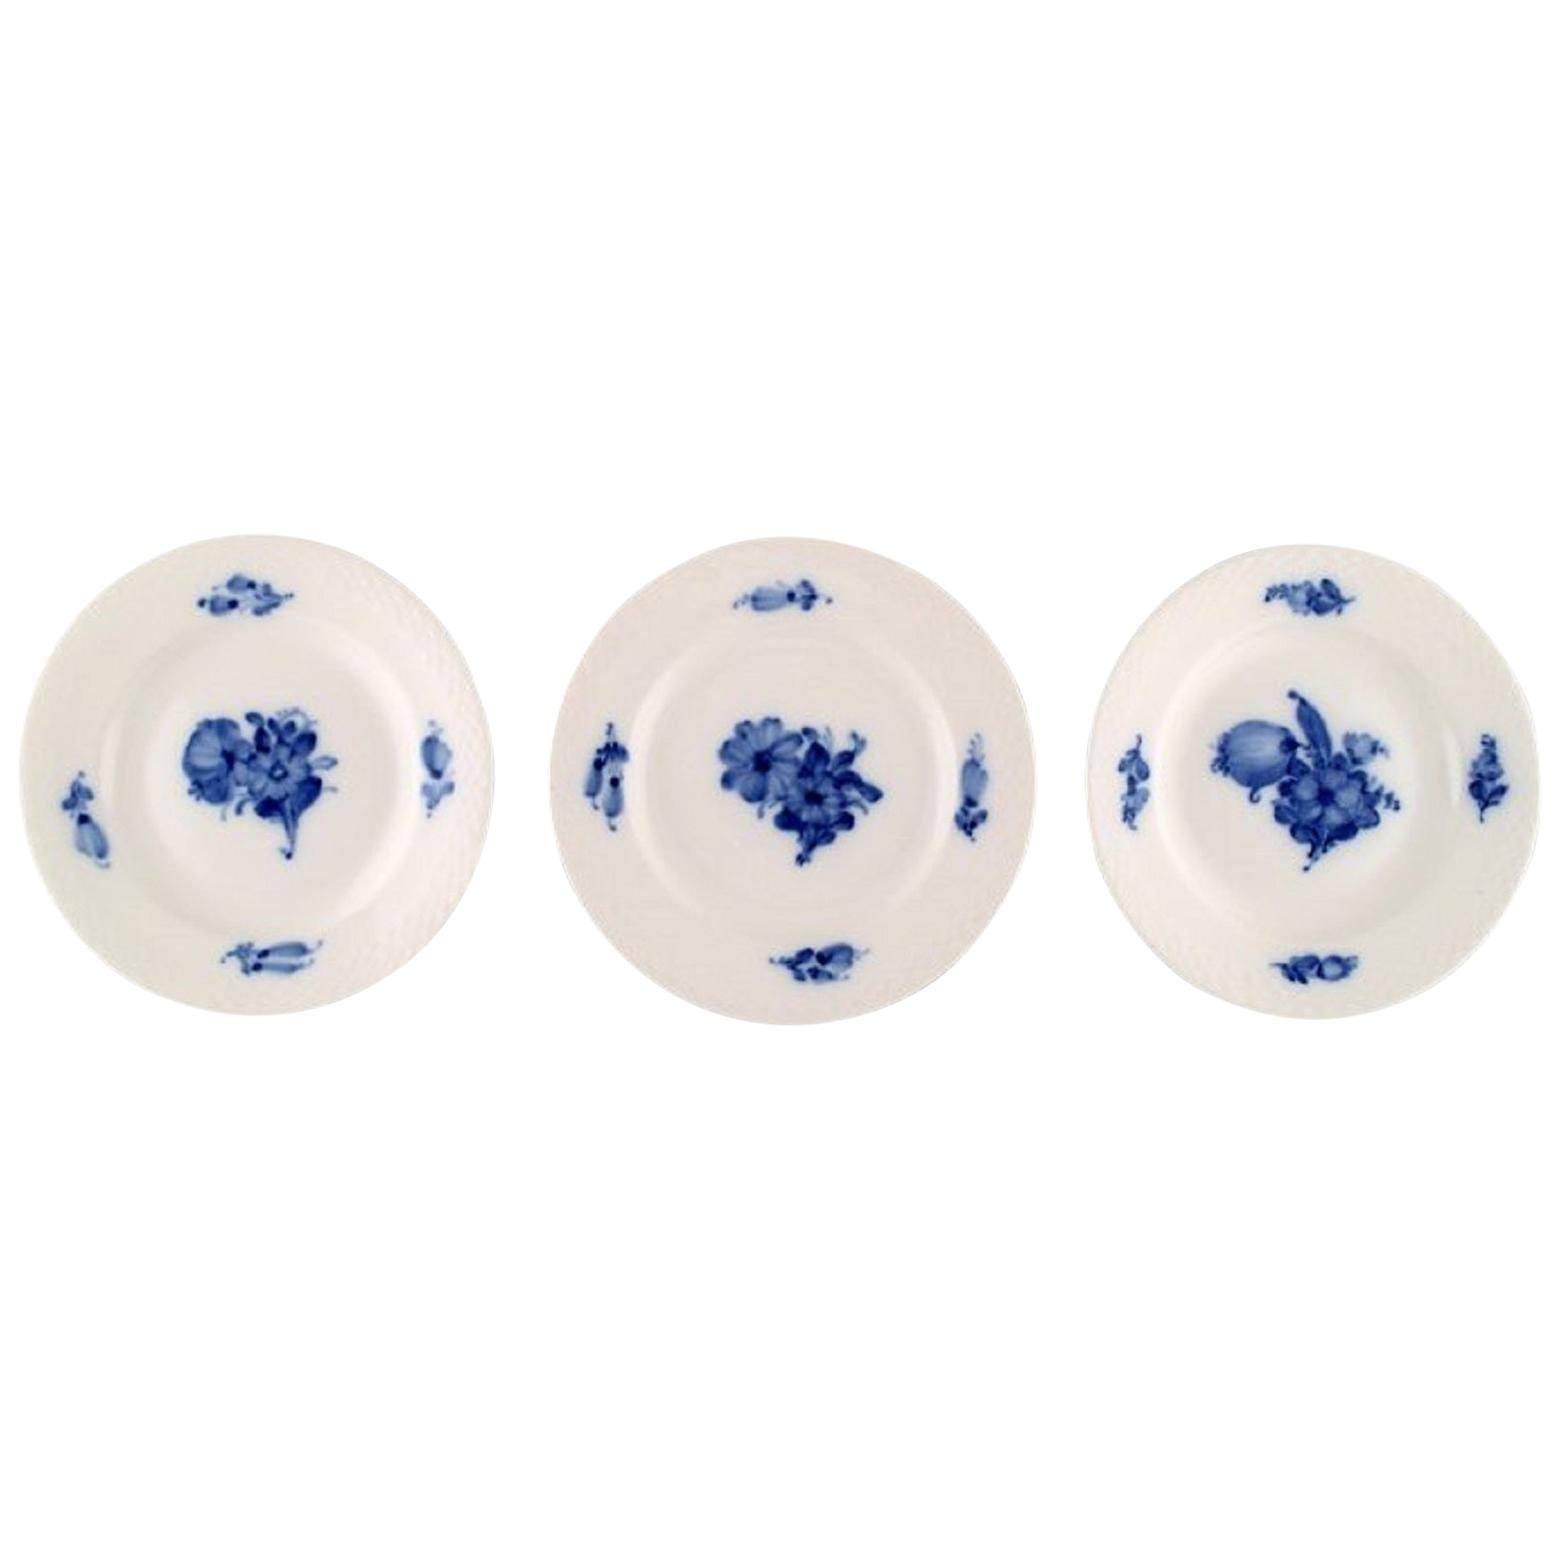 Three Blue Flower Braided Cake Plates from Royal Copenhagen, Number 10/8092 For Sale